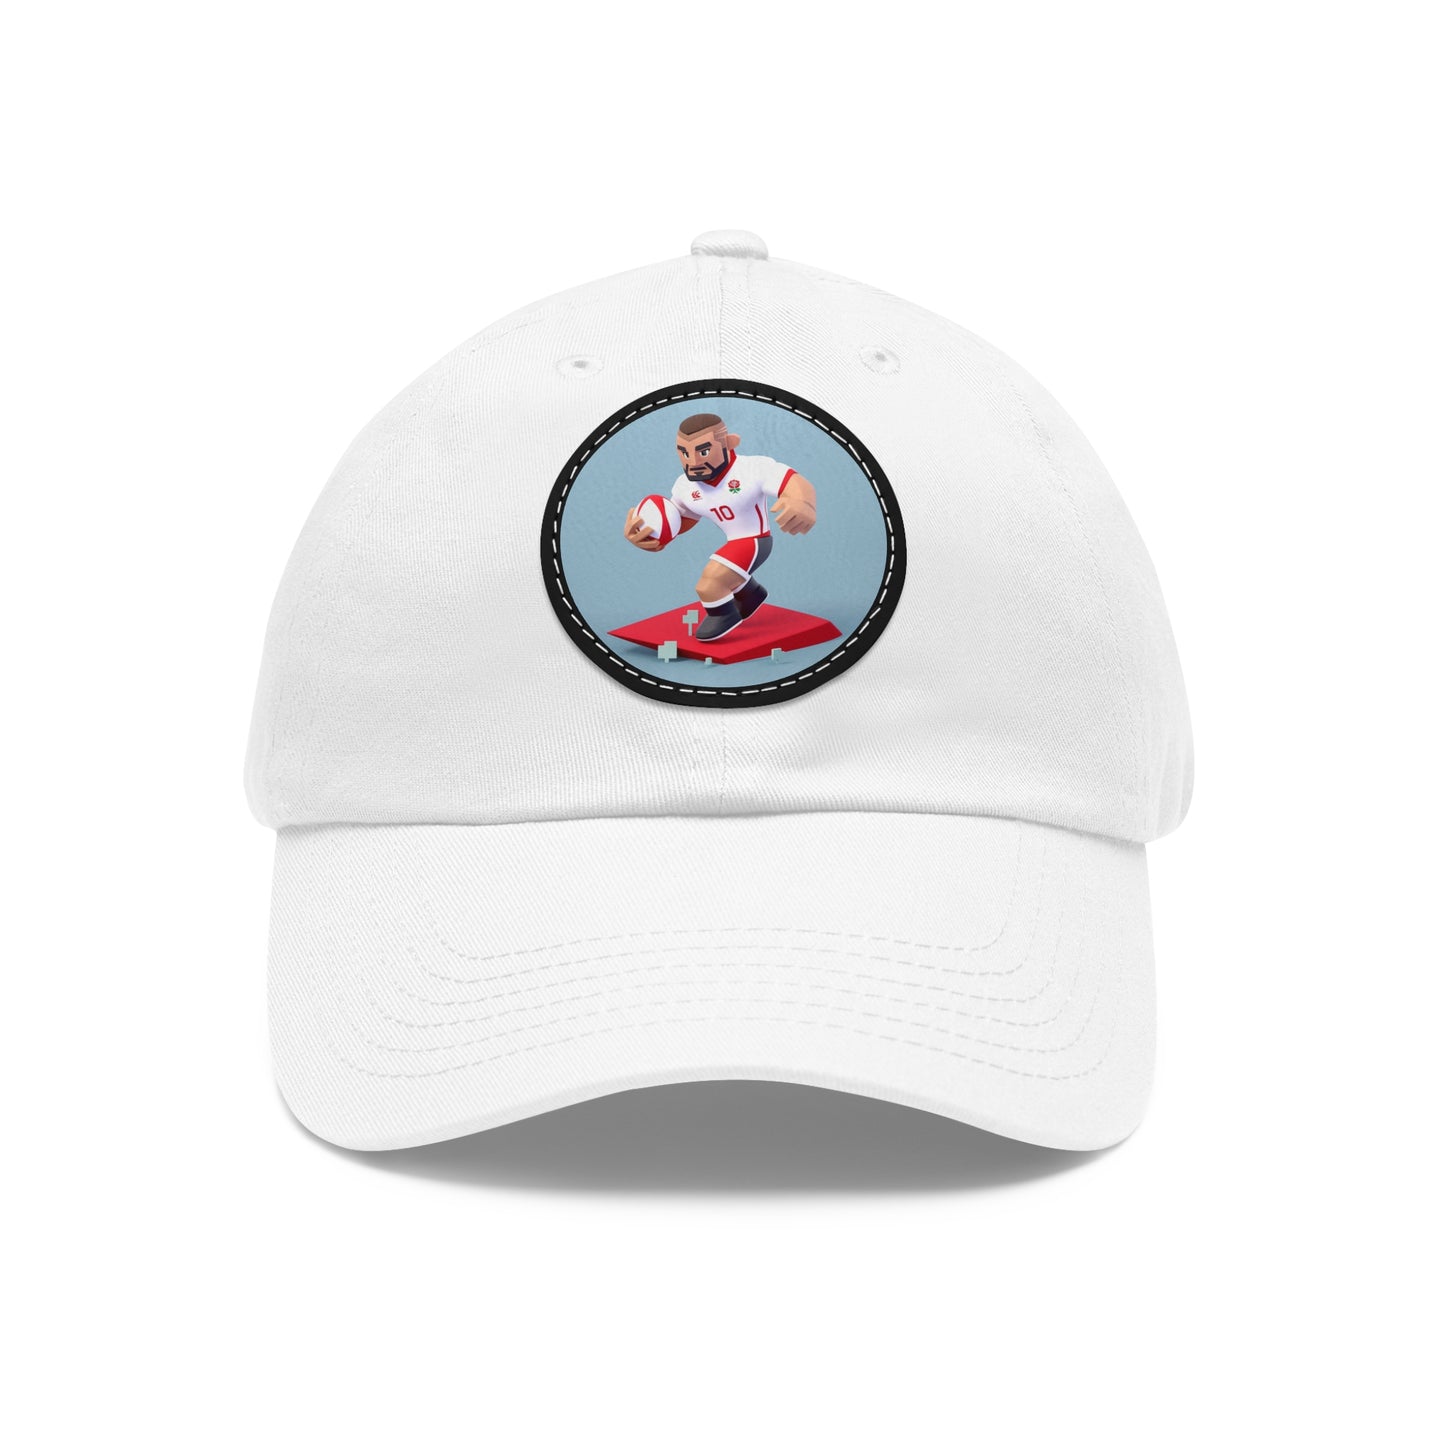 England Action Hat